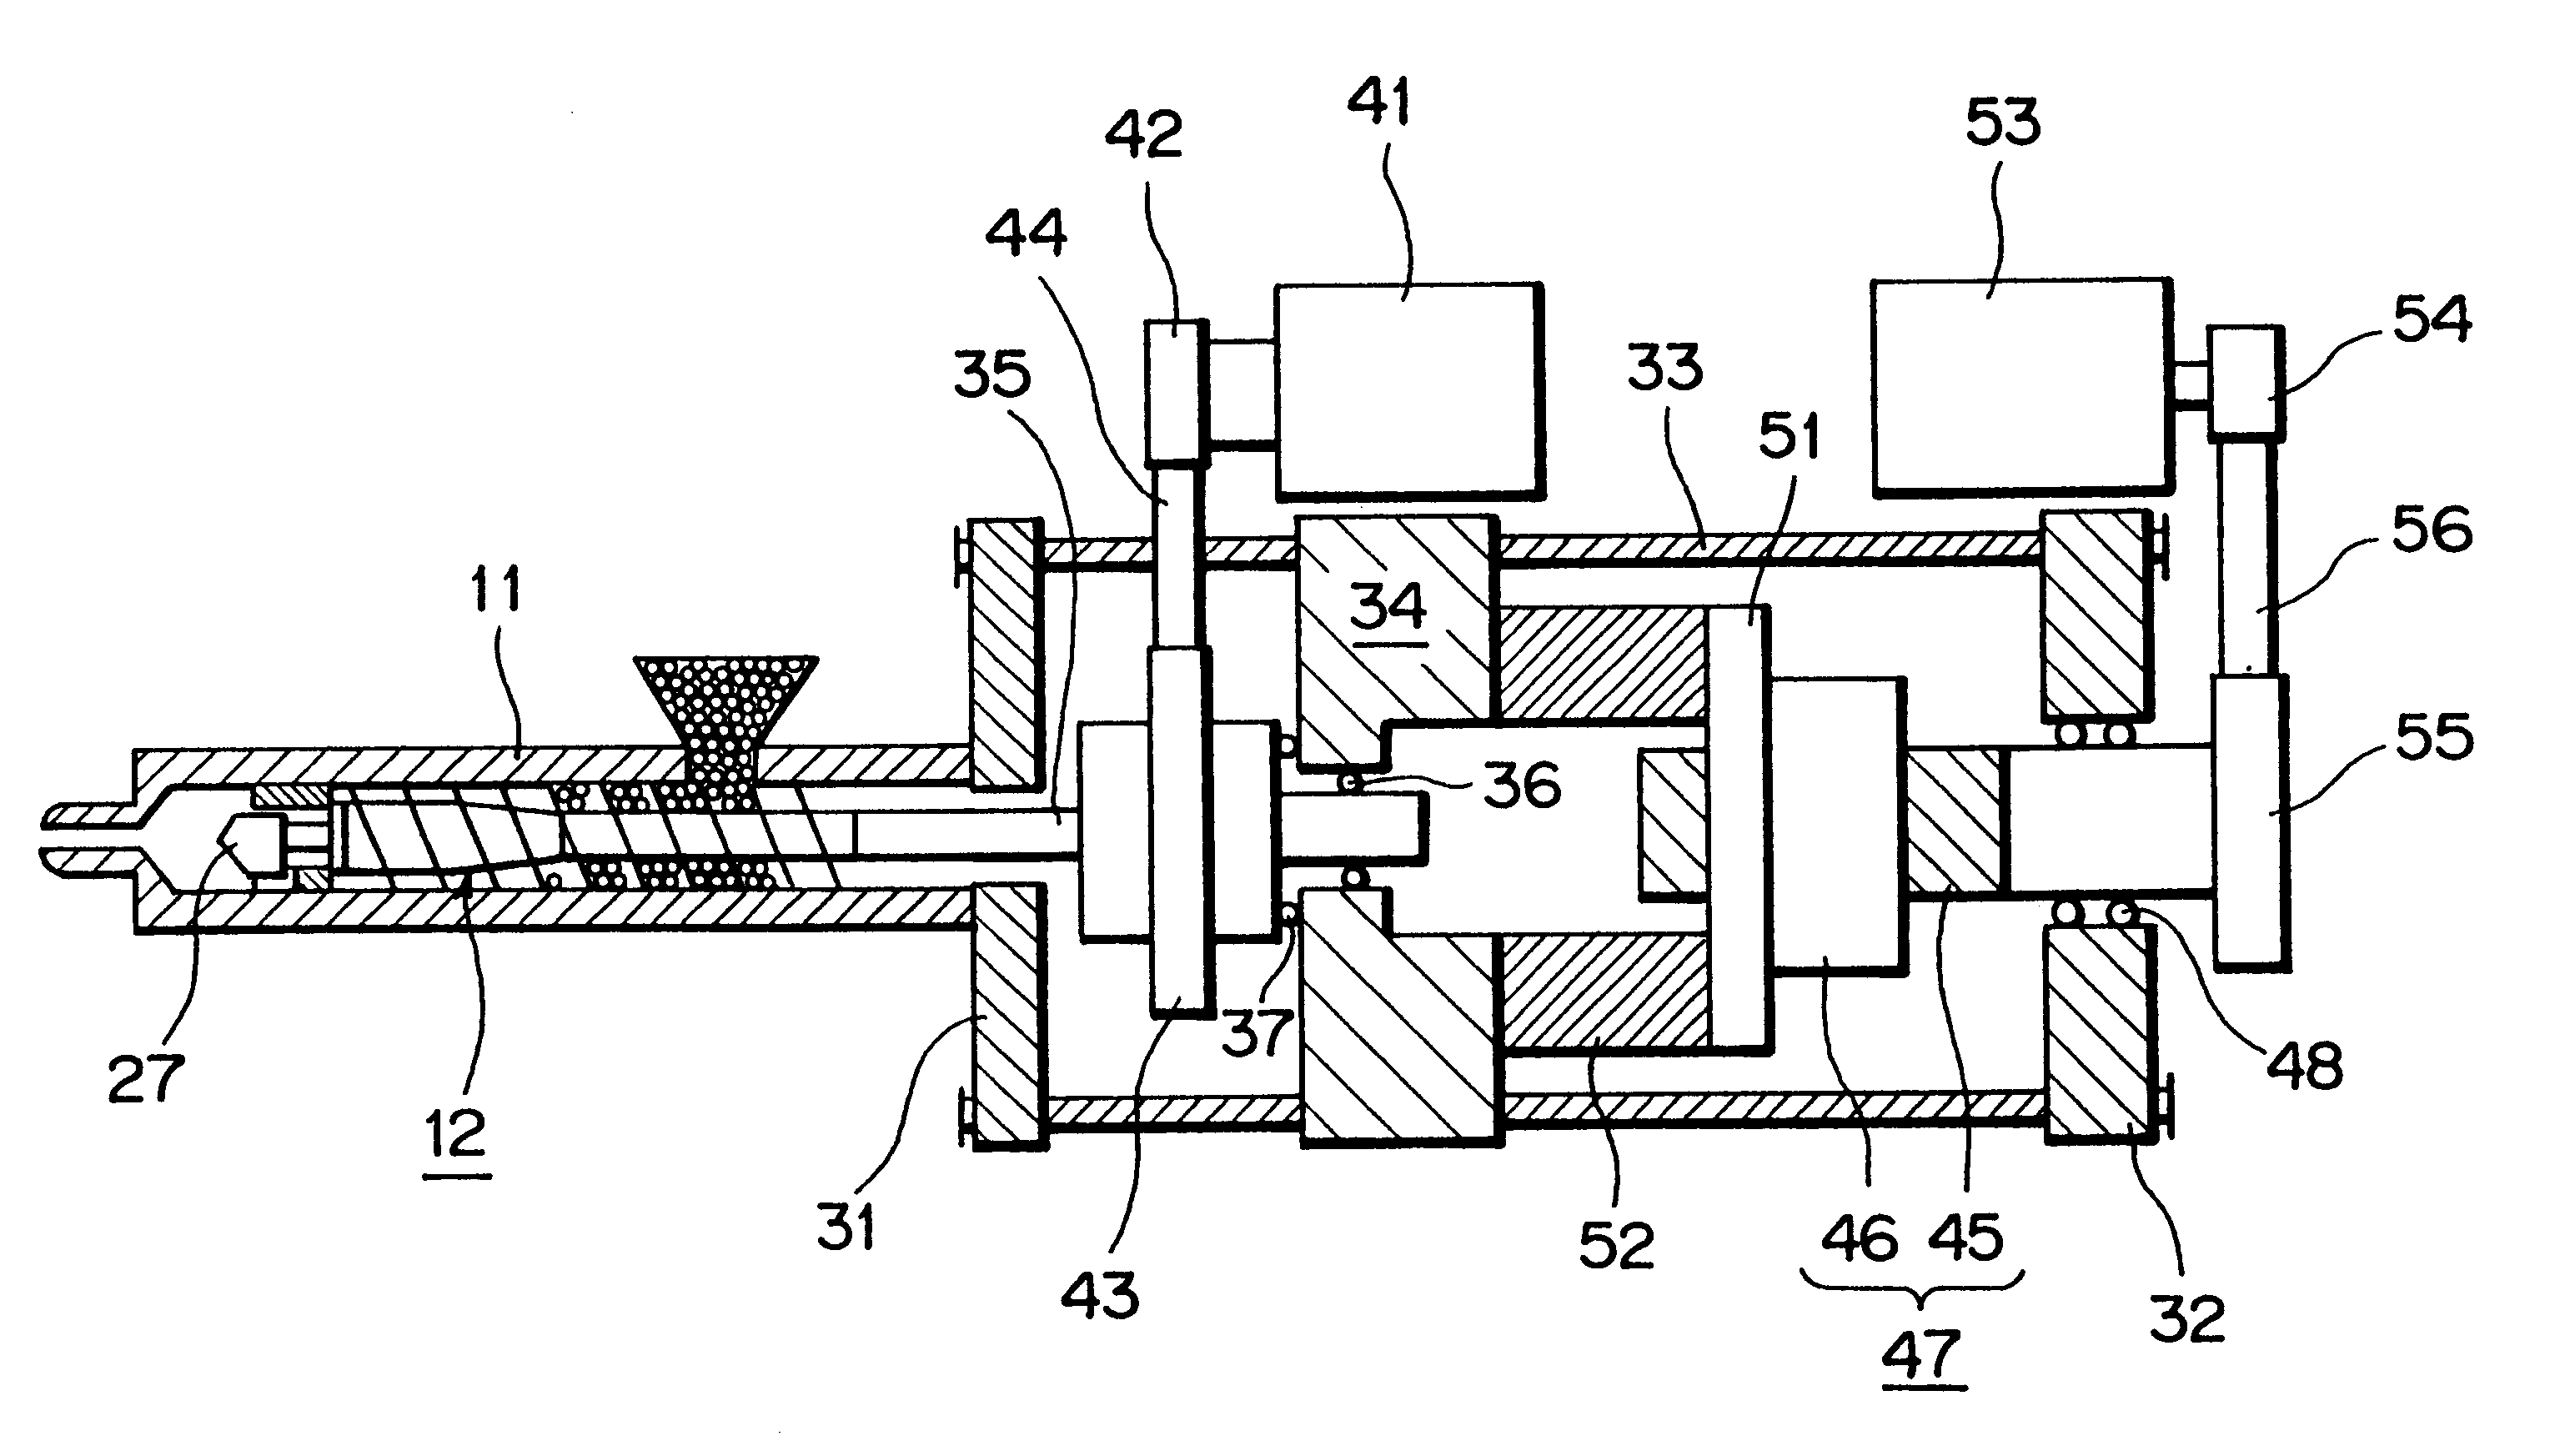 Injection apparatus and method of controlling the same